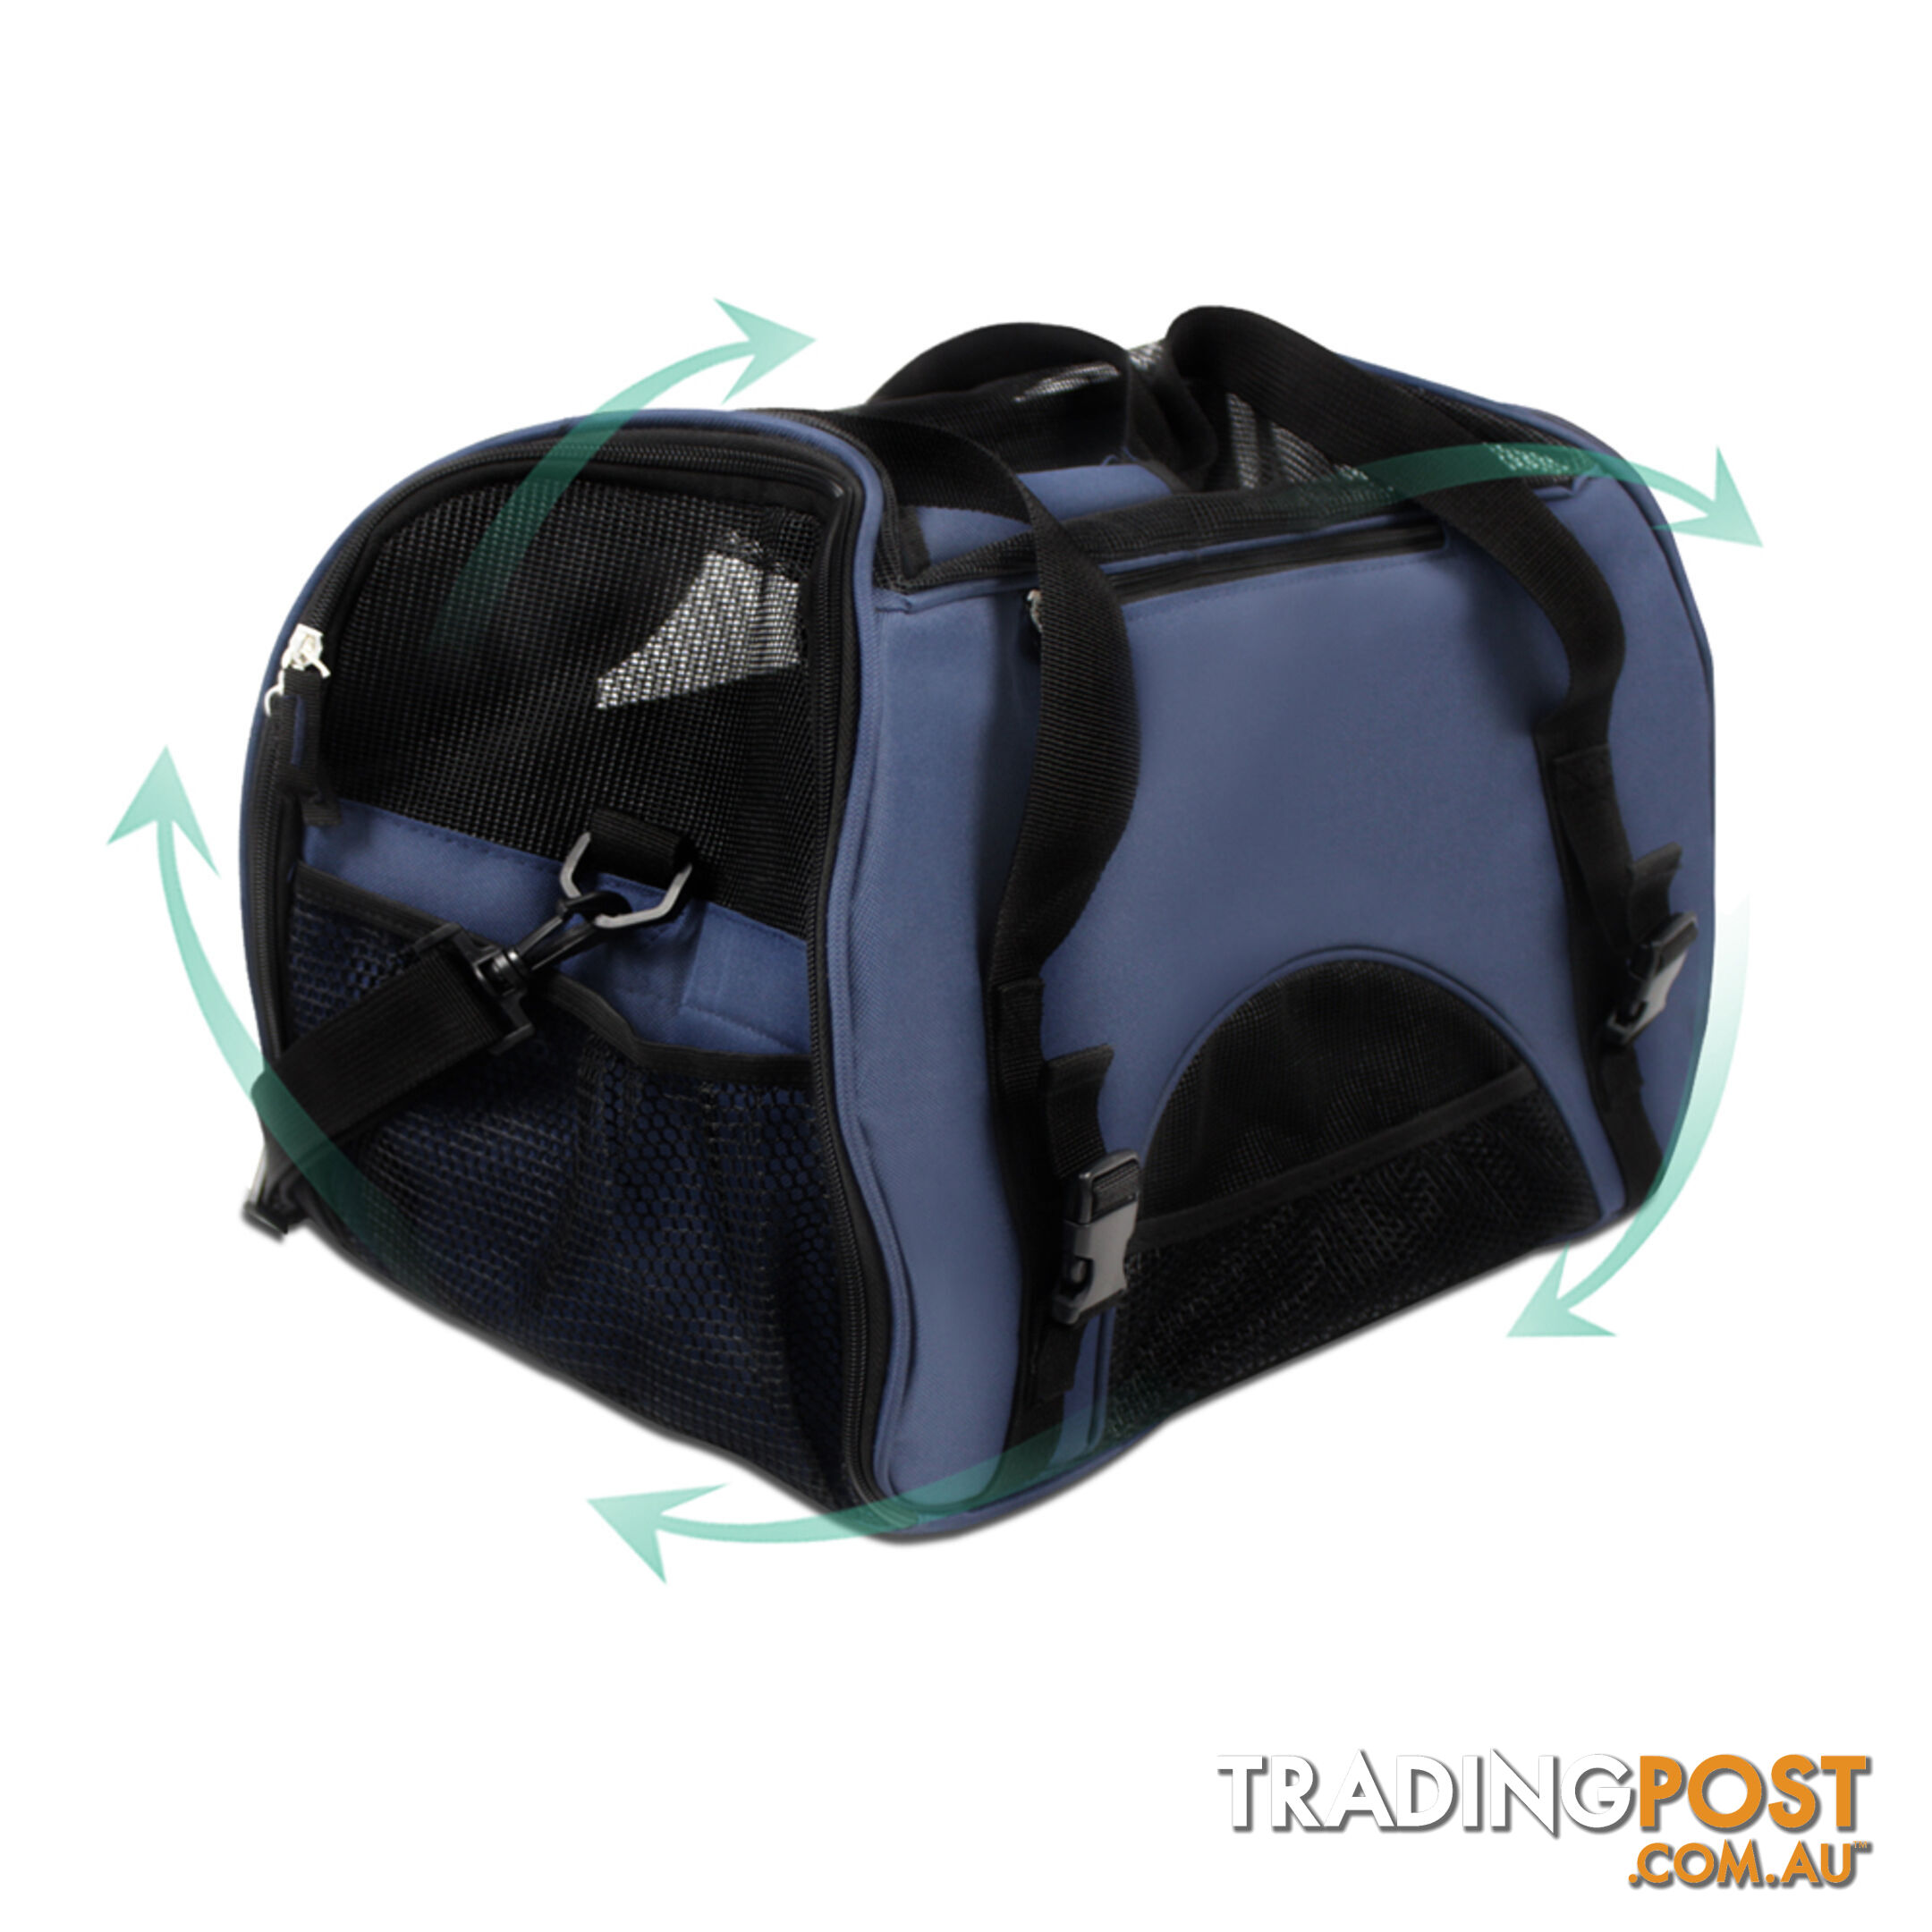 Portable Pet Carrier with Safety Leash - Blue